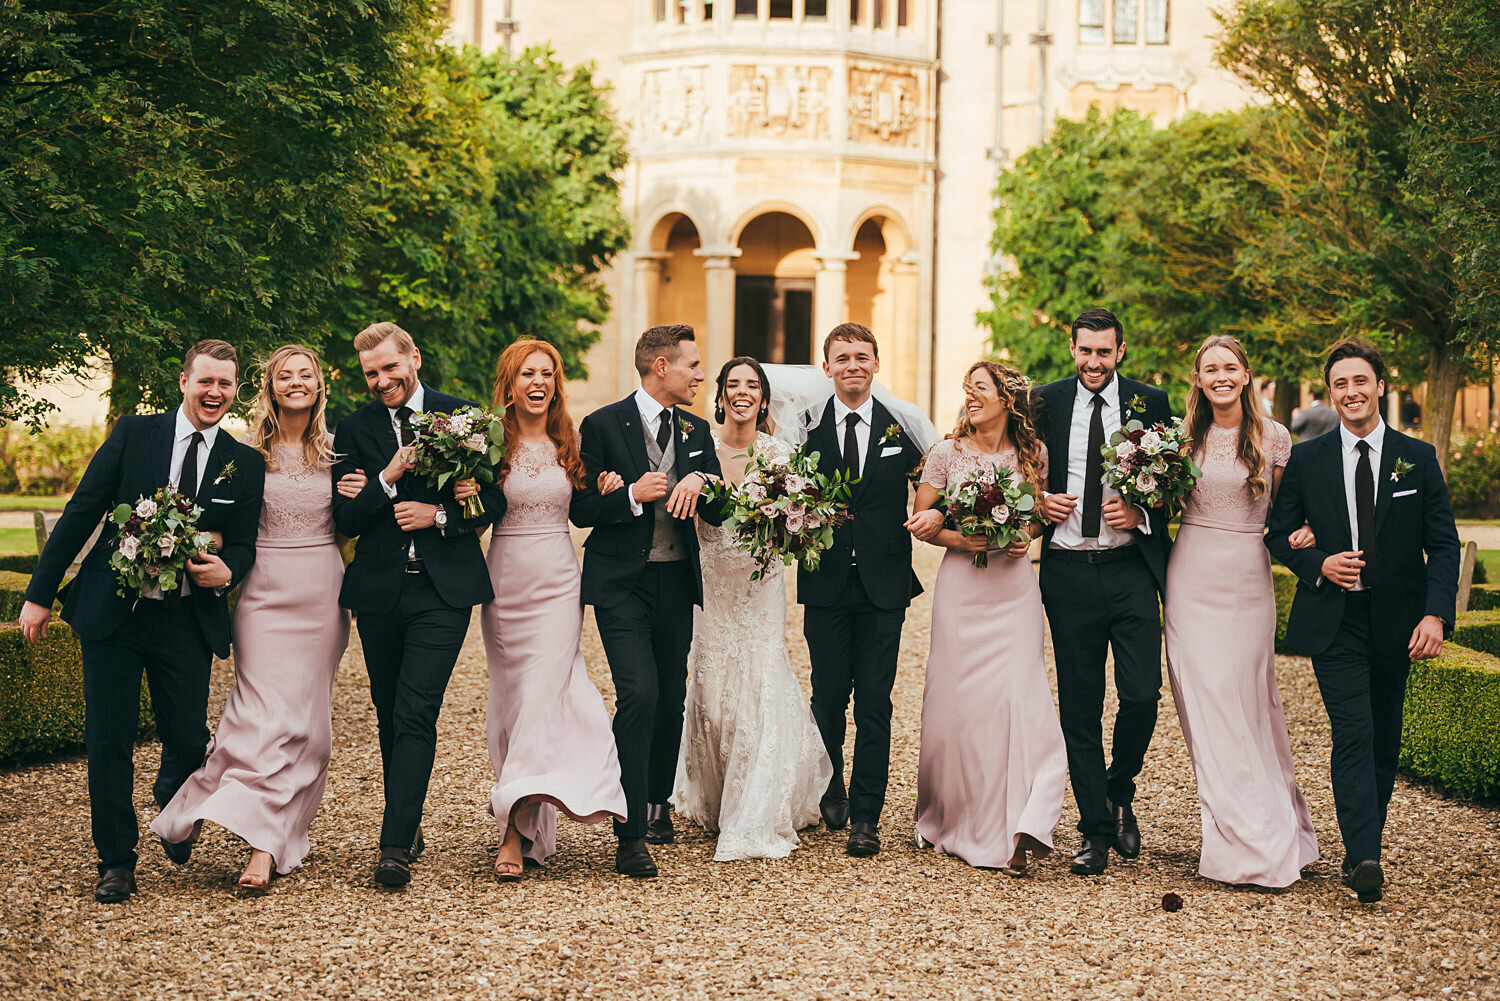 Bridal party at a wedding in Nottingham